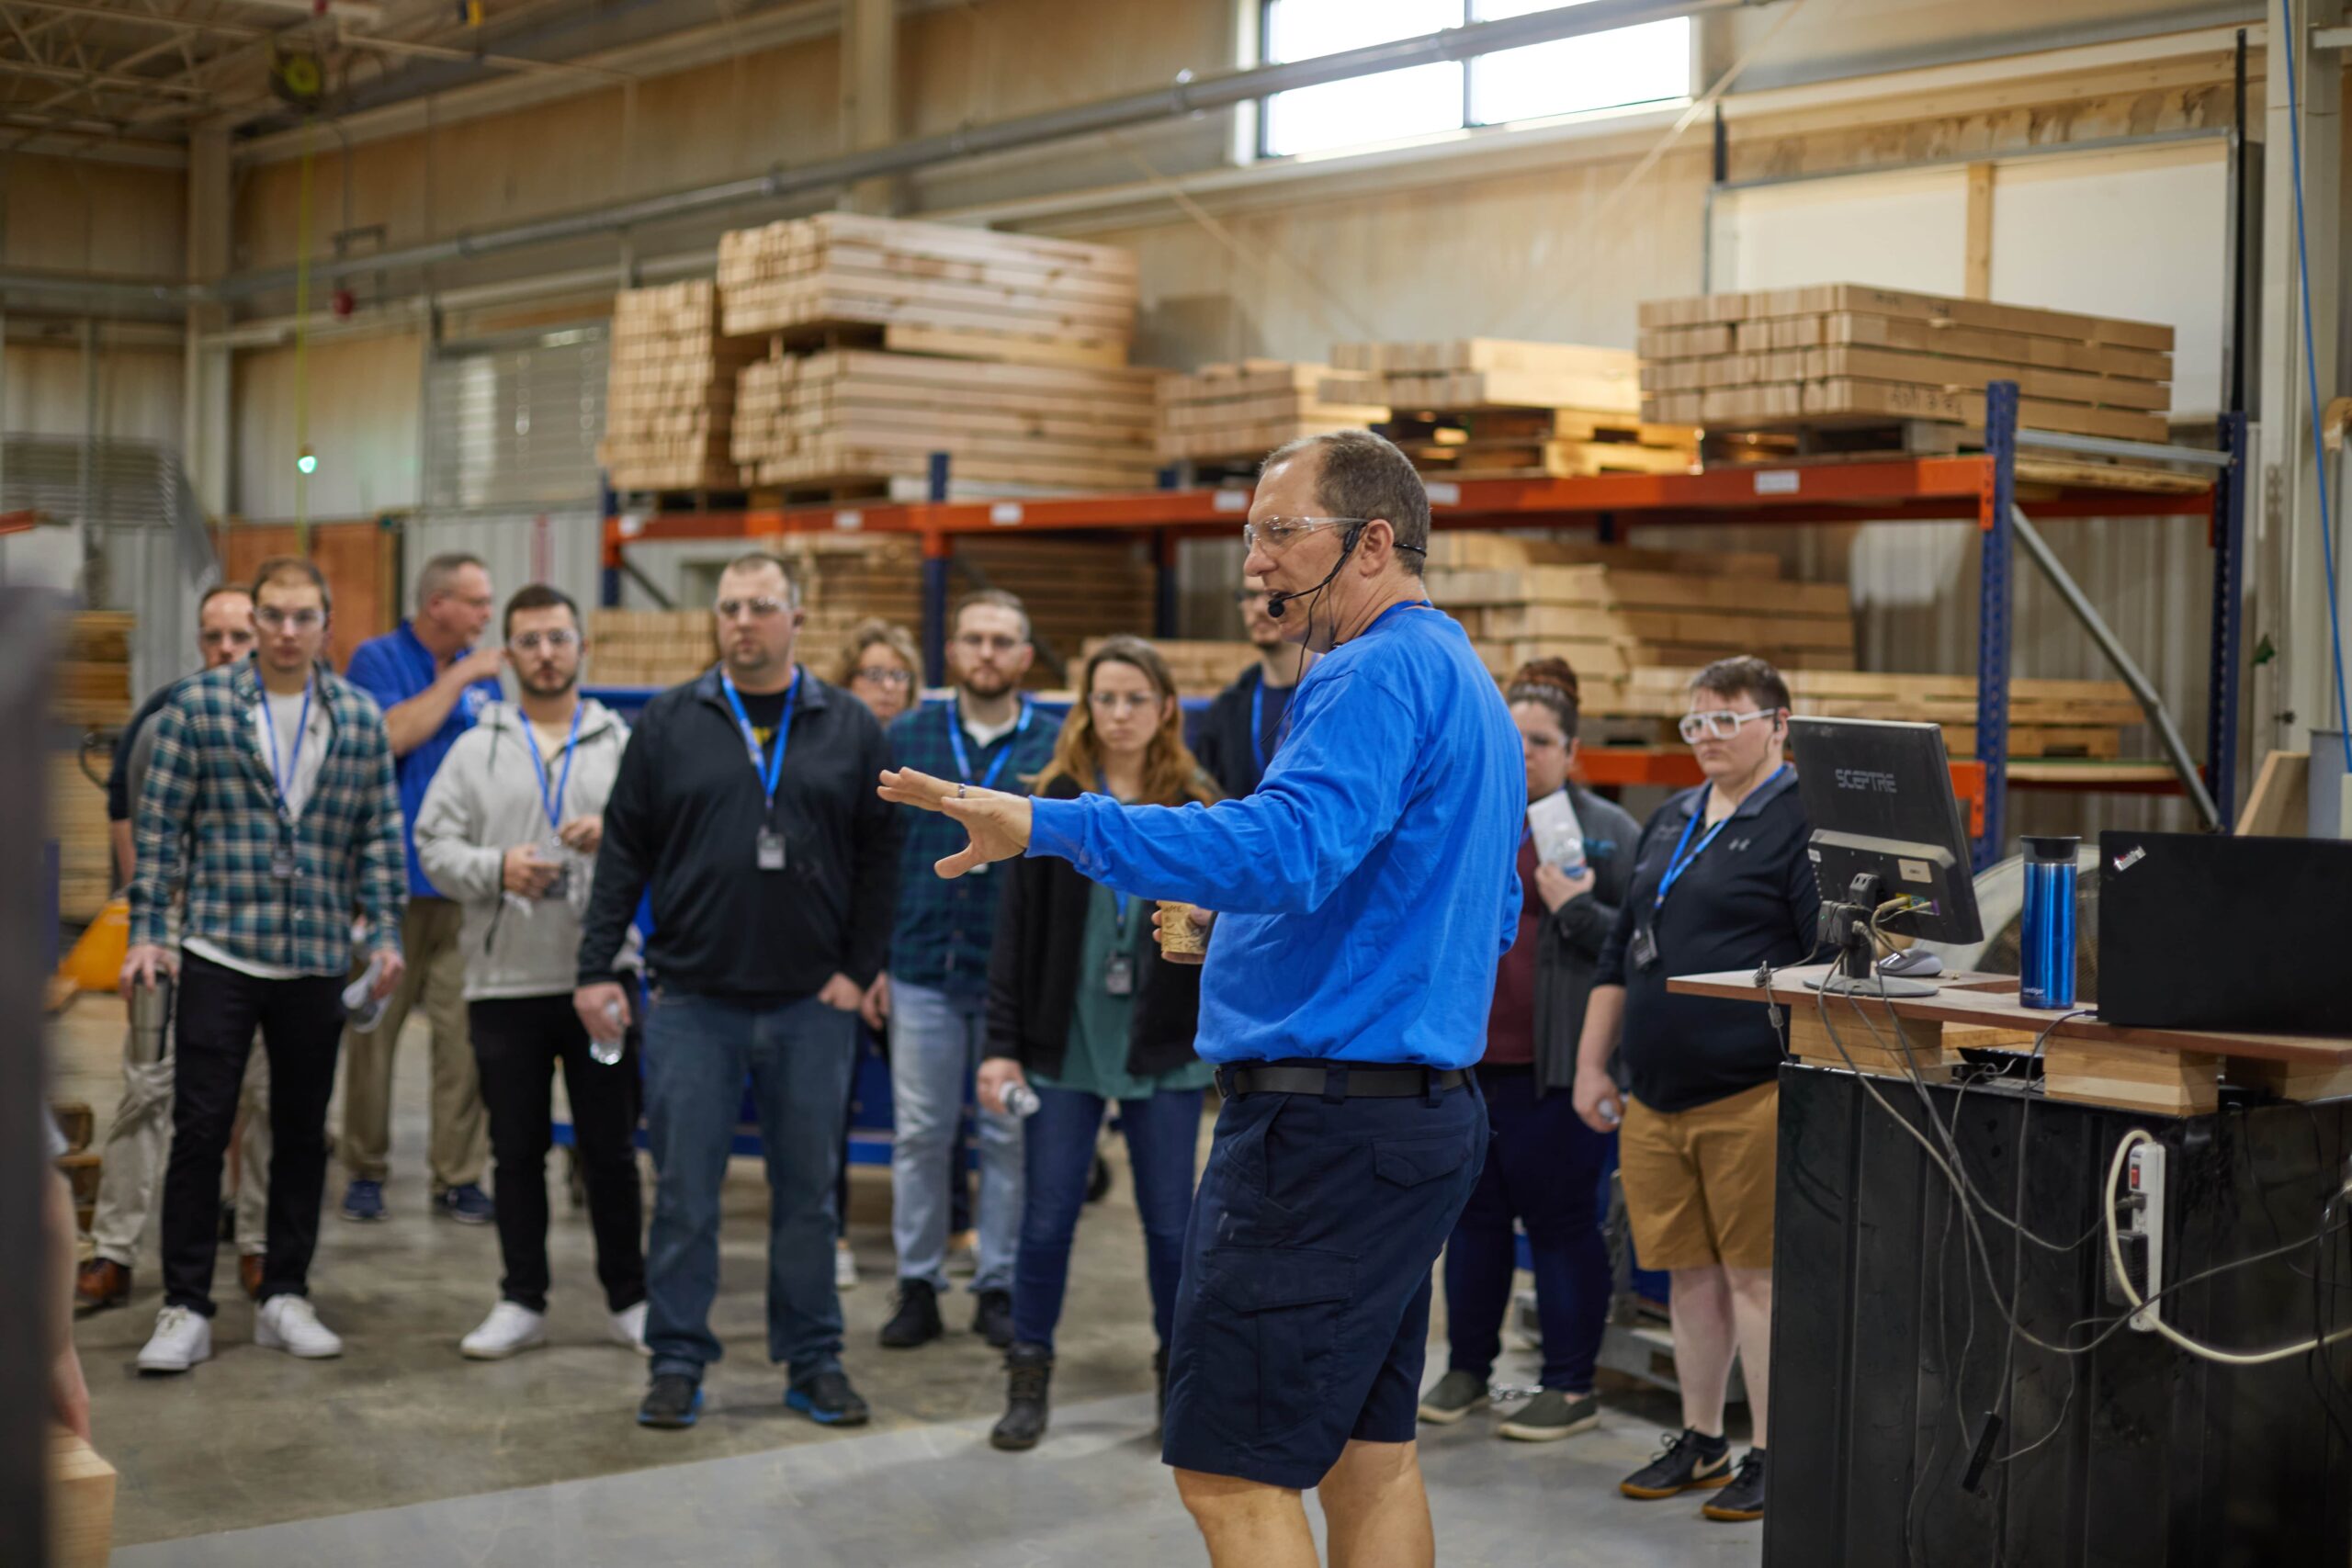 Len Morris, Founder and CEO of Viewrail, leading a tour of Viewrail plants and facilities in Goshen Indiana